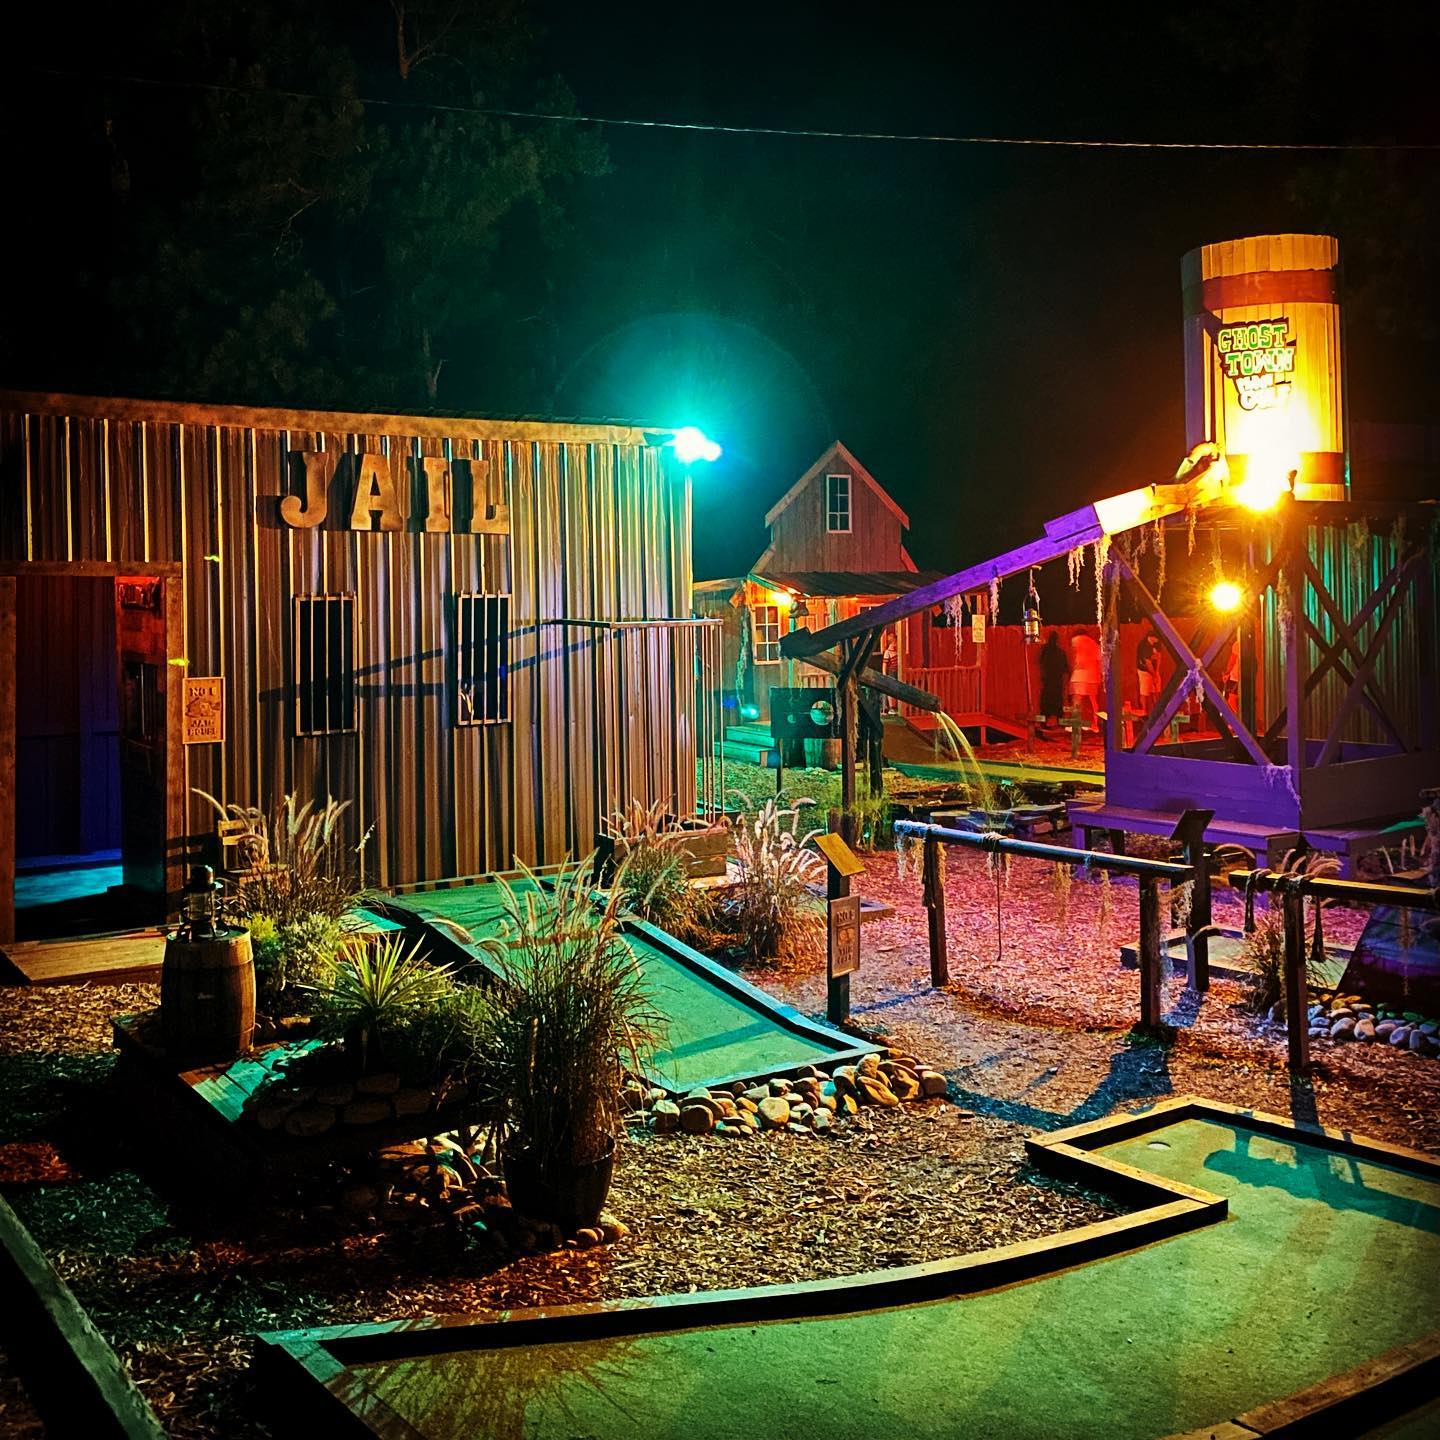 Has anyone been to the Madworld Haunted House attractions in Piedmont?  thoughts/Reviews? : r/greenville